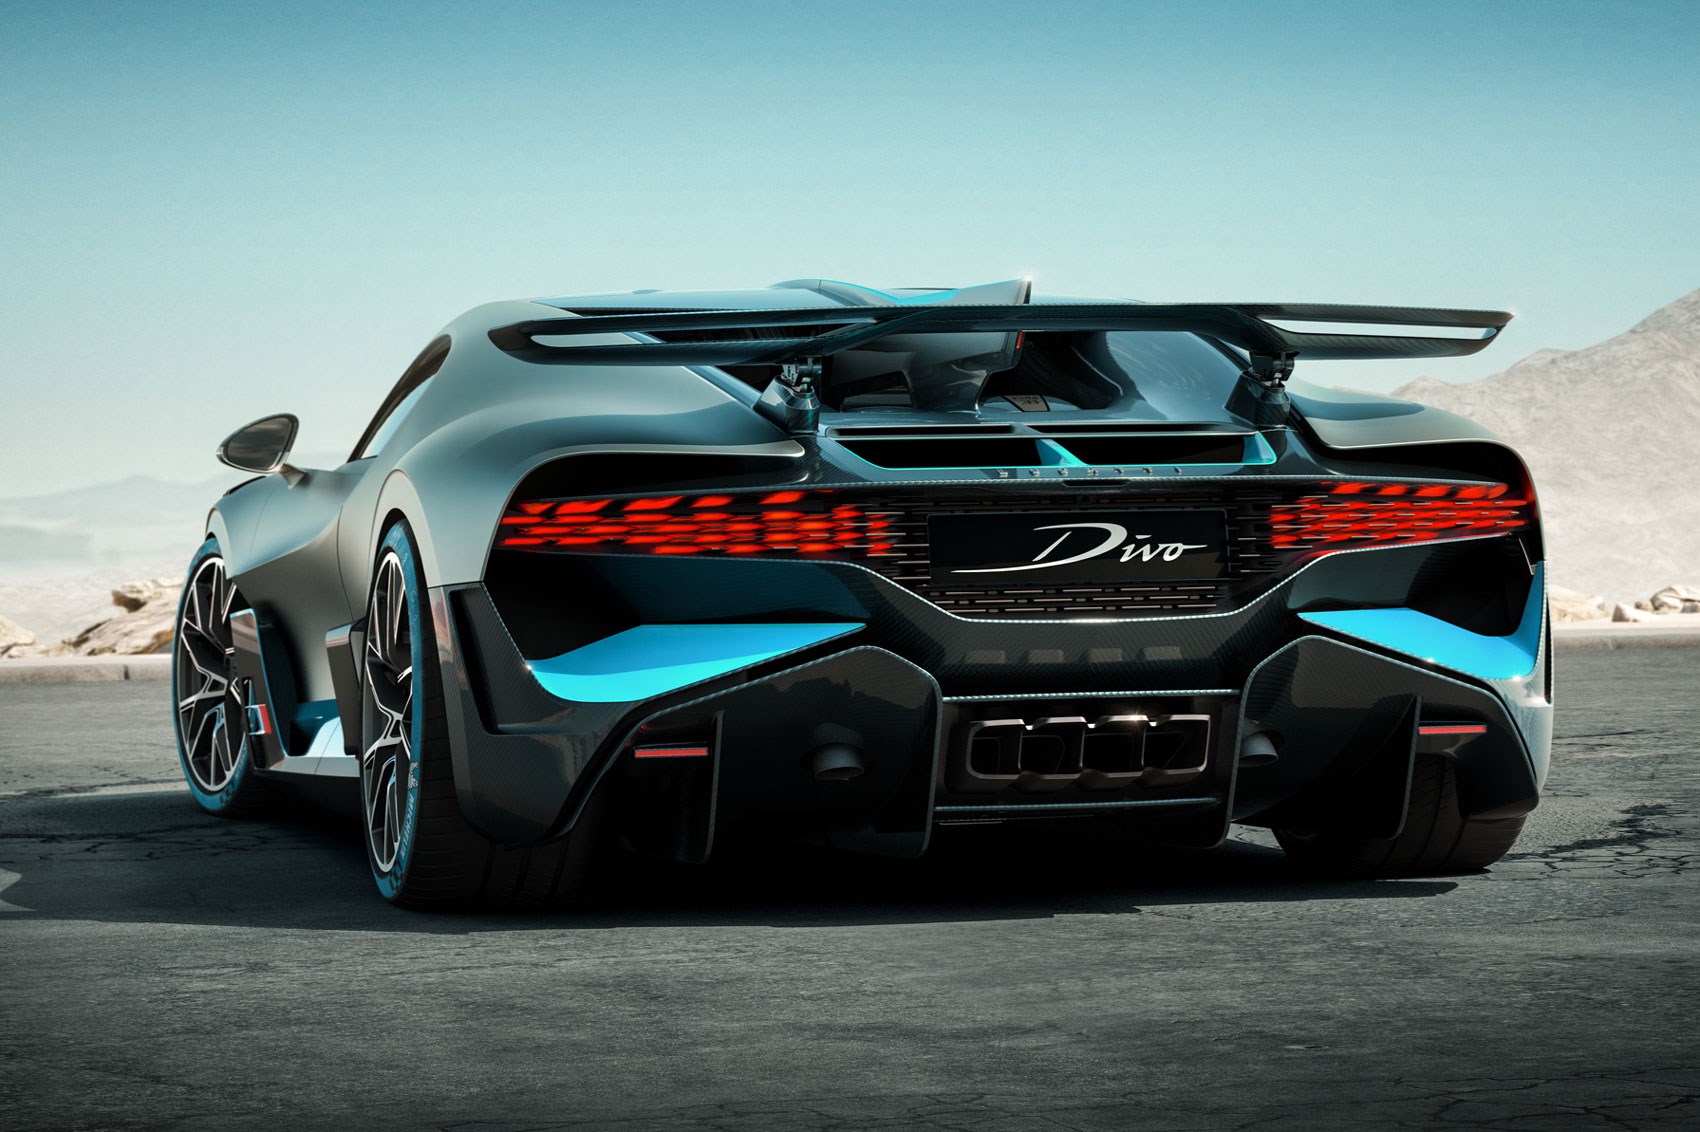 Is the Bugatti Divo the most valuable production car of the 21st century?